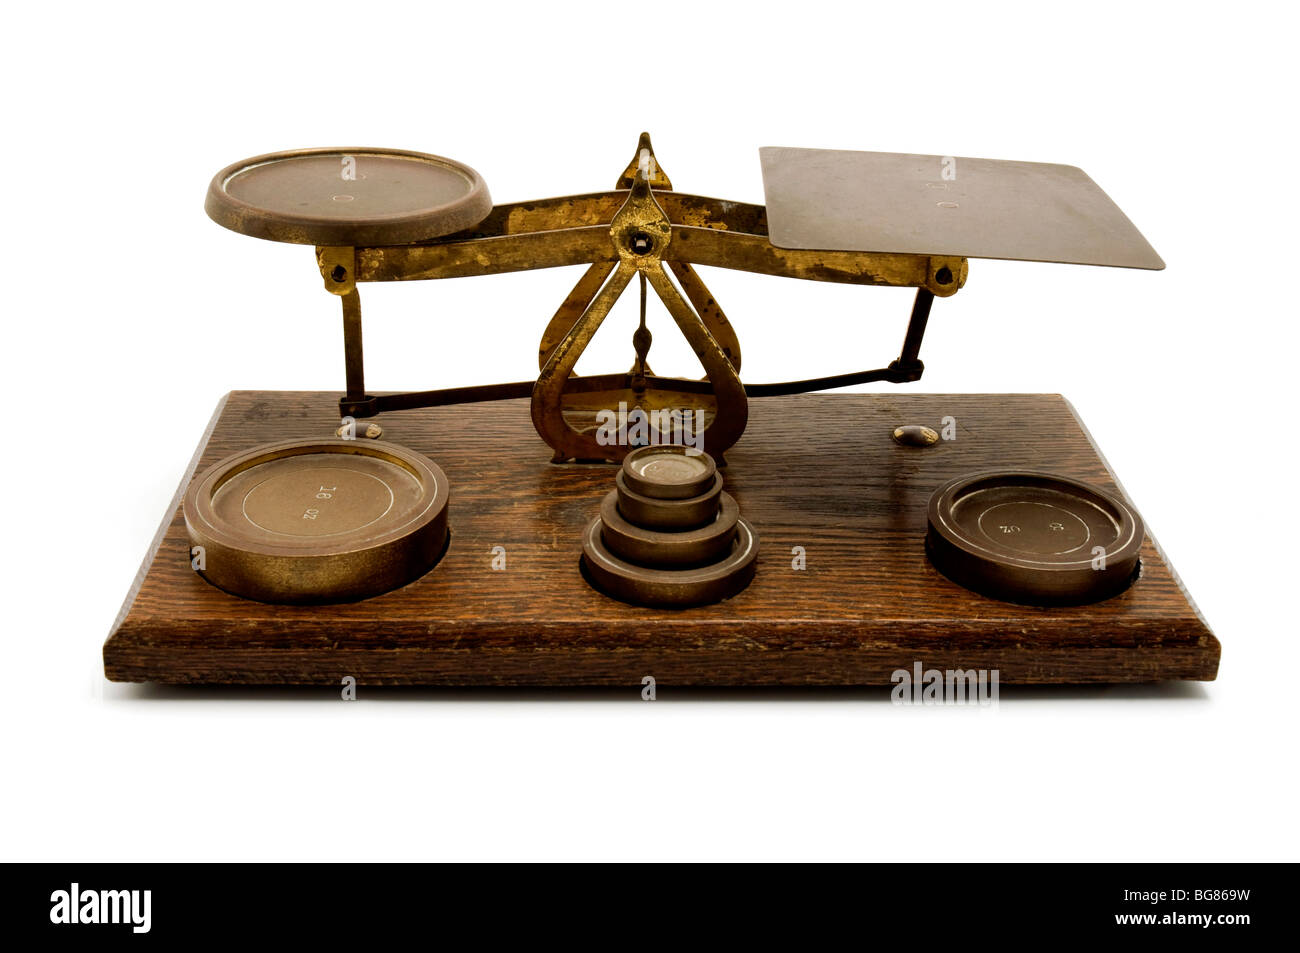 An old two pan balance with weights on a white background Stock Photo